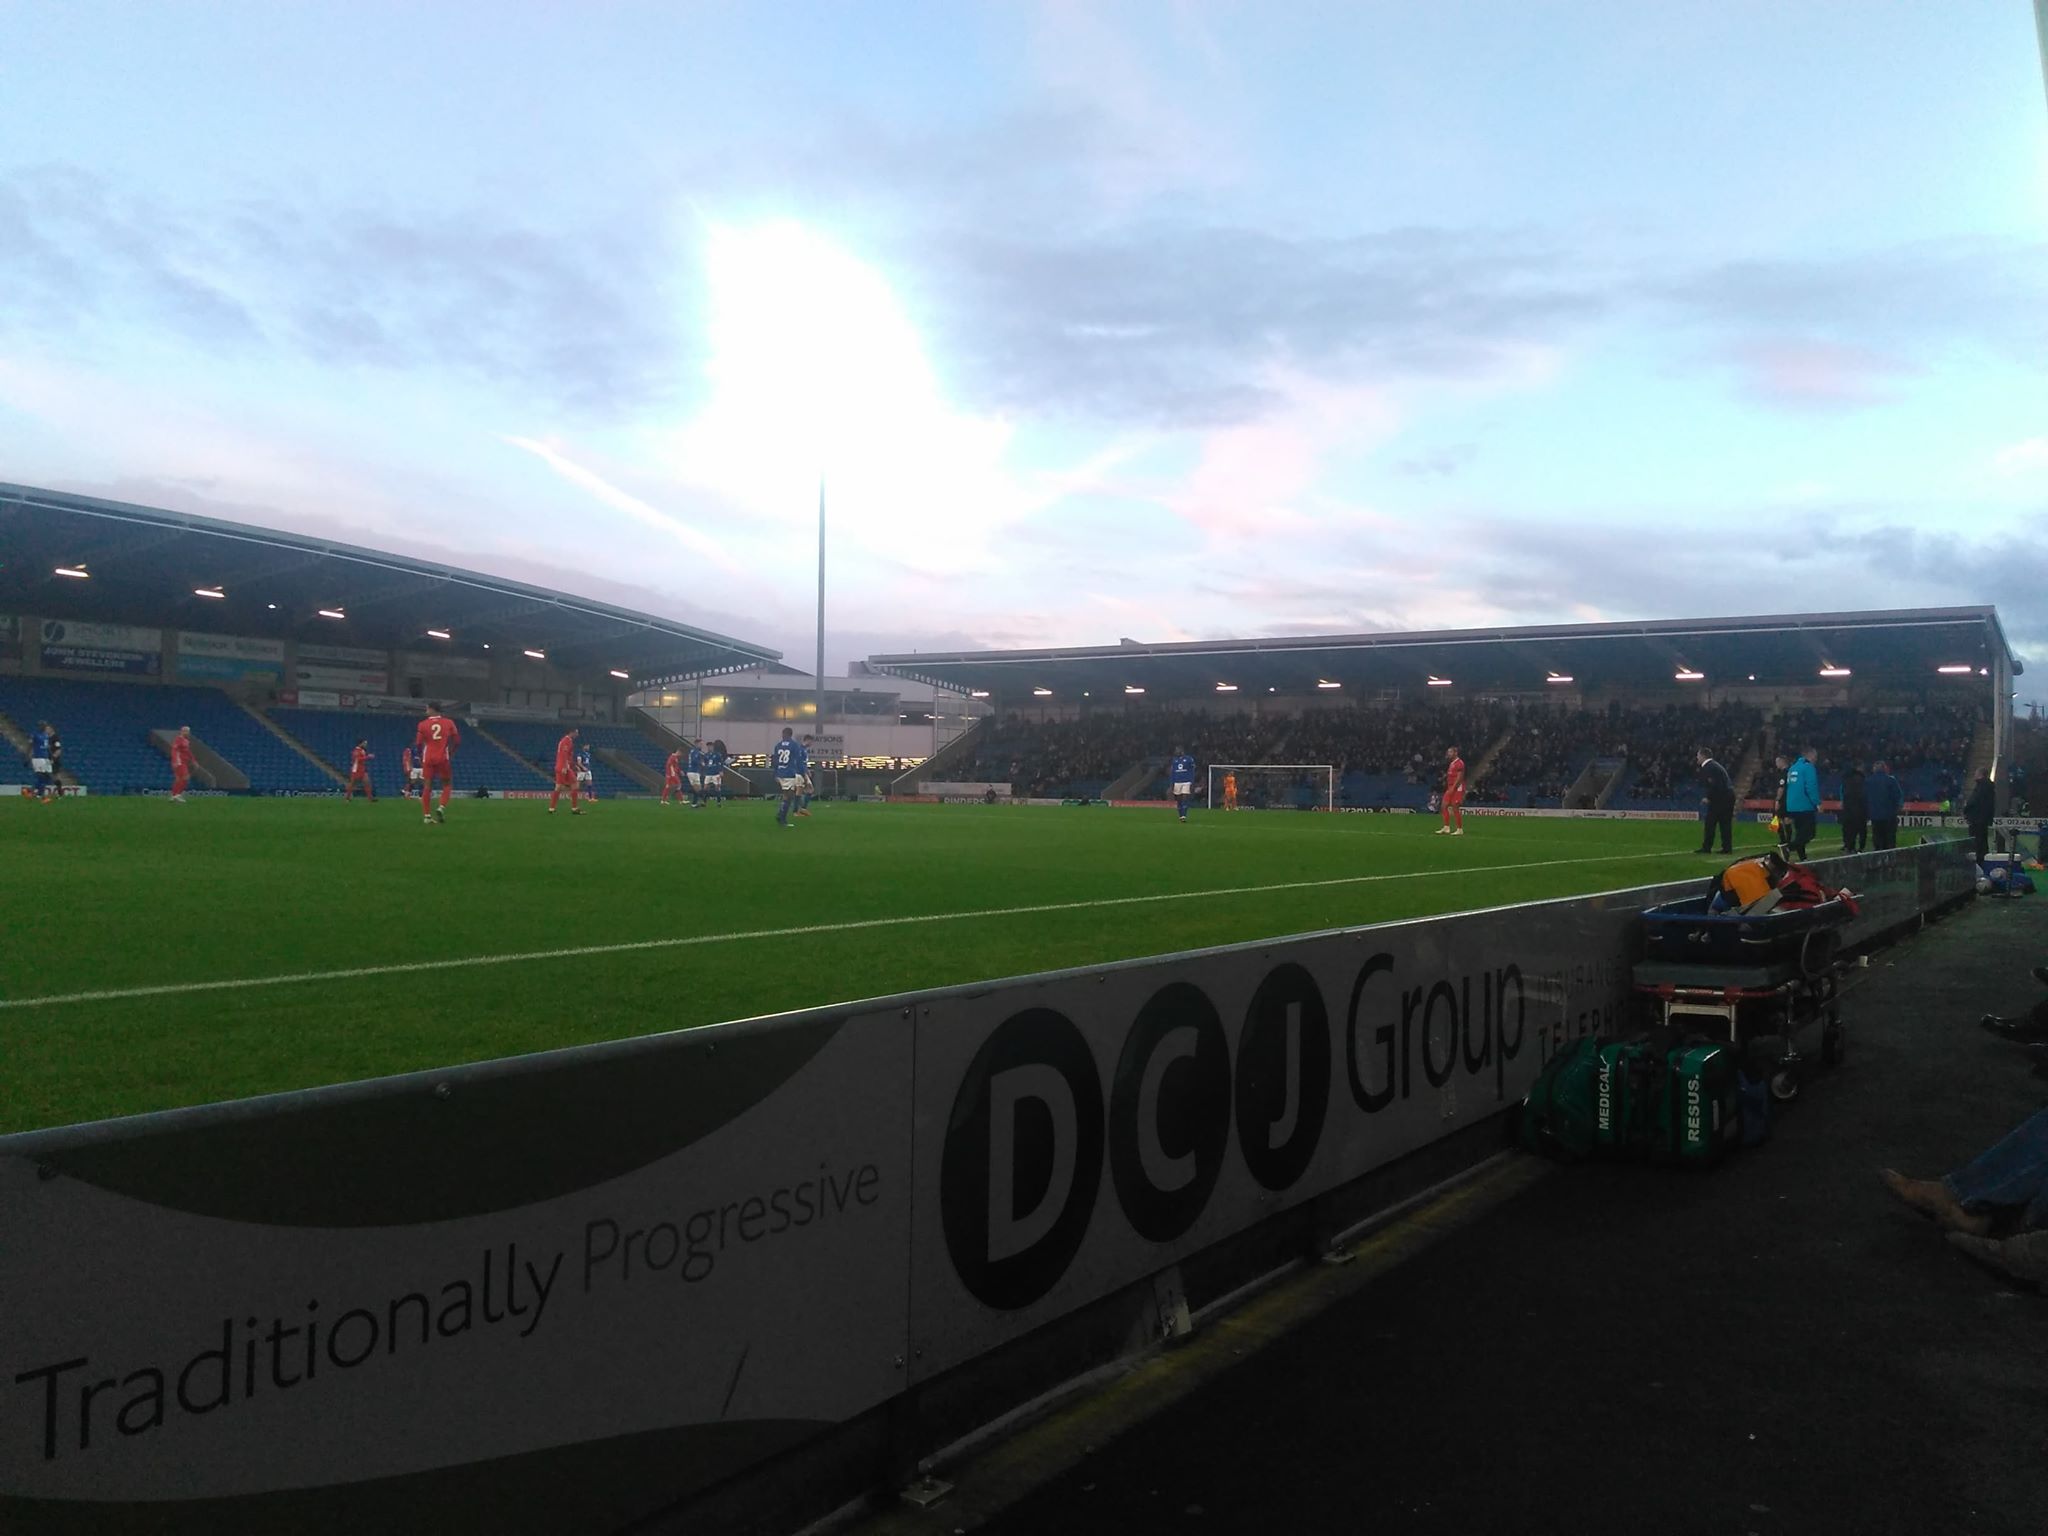 Chesterfield vs Billericay Town | Connor's Football Travels2048 x 1536